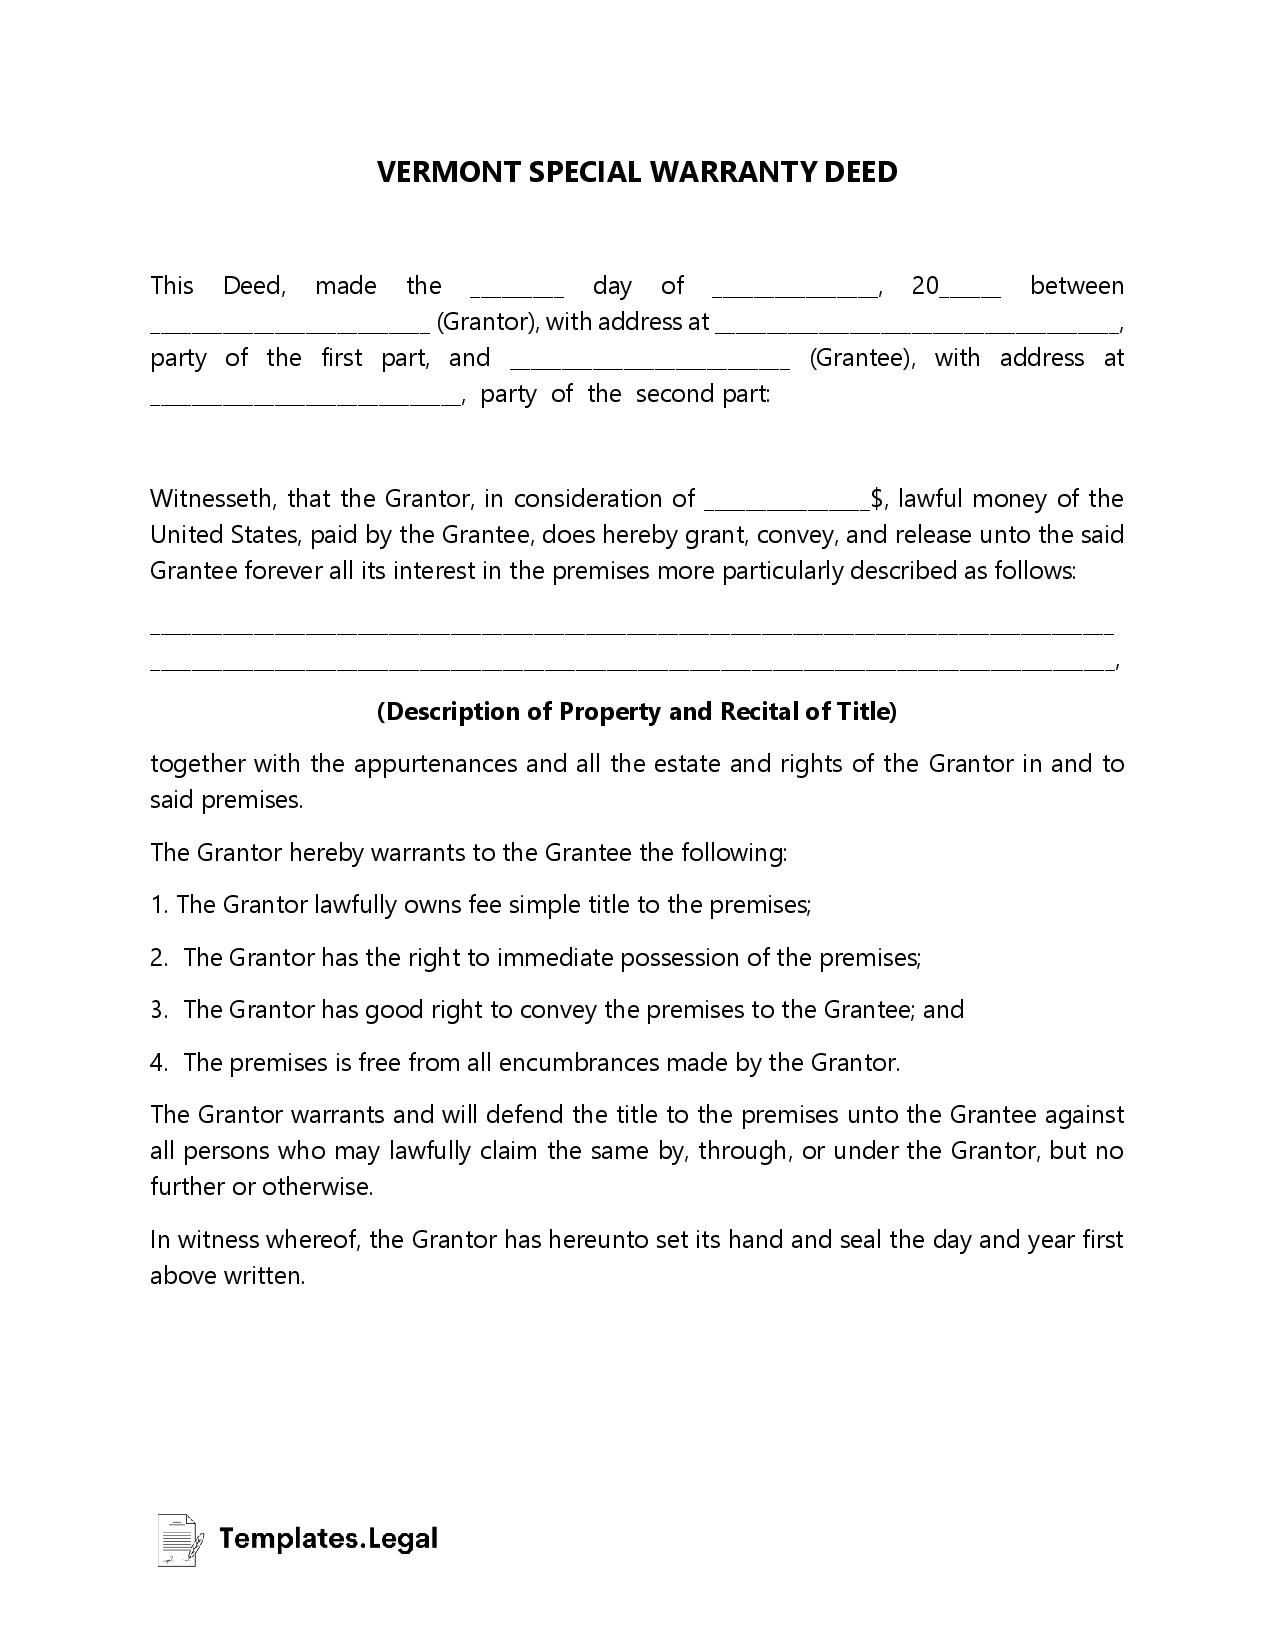 Vermont Special Warranty Deed - Templates.Legal